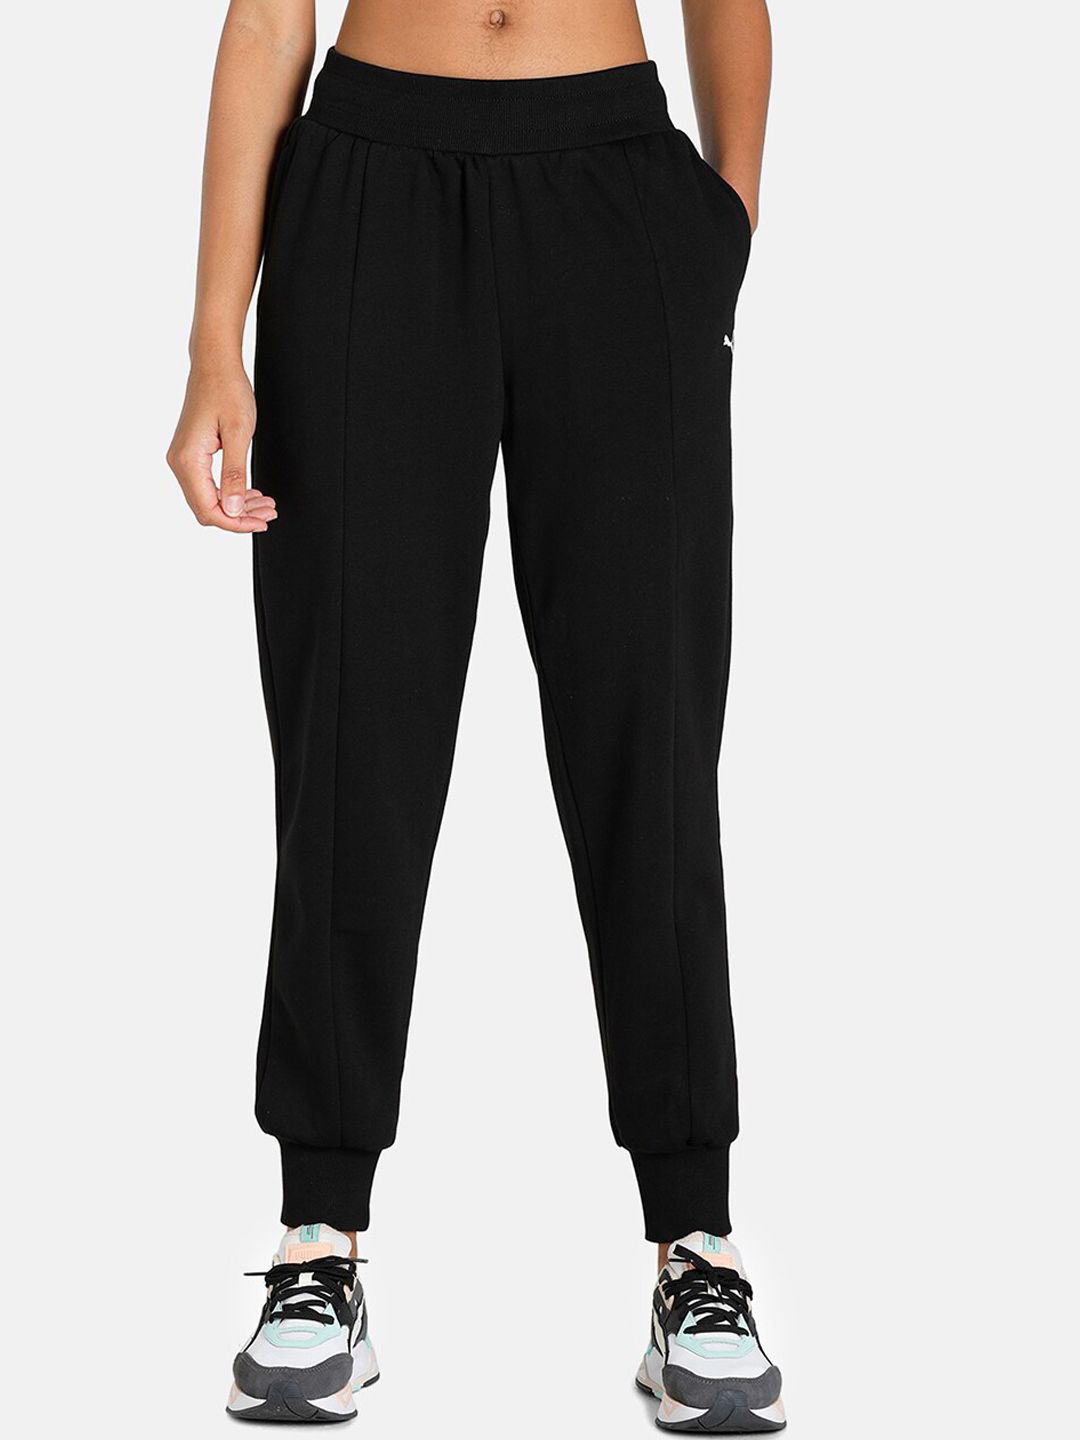 Puma Women Solid Rebel Track Pants Price in India